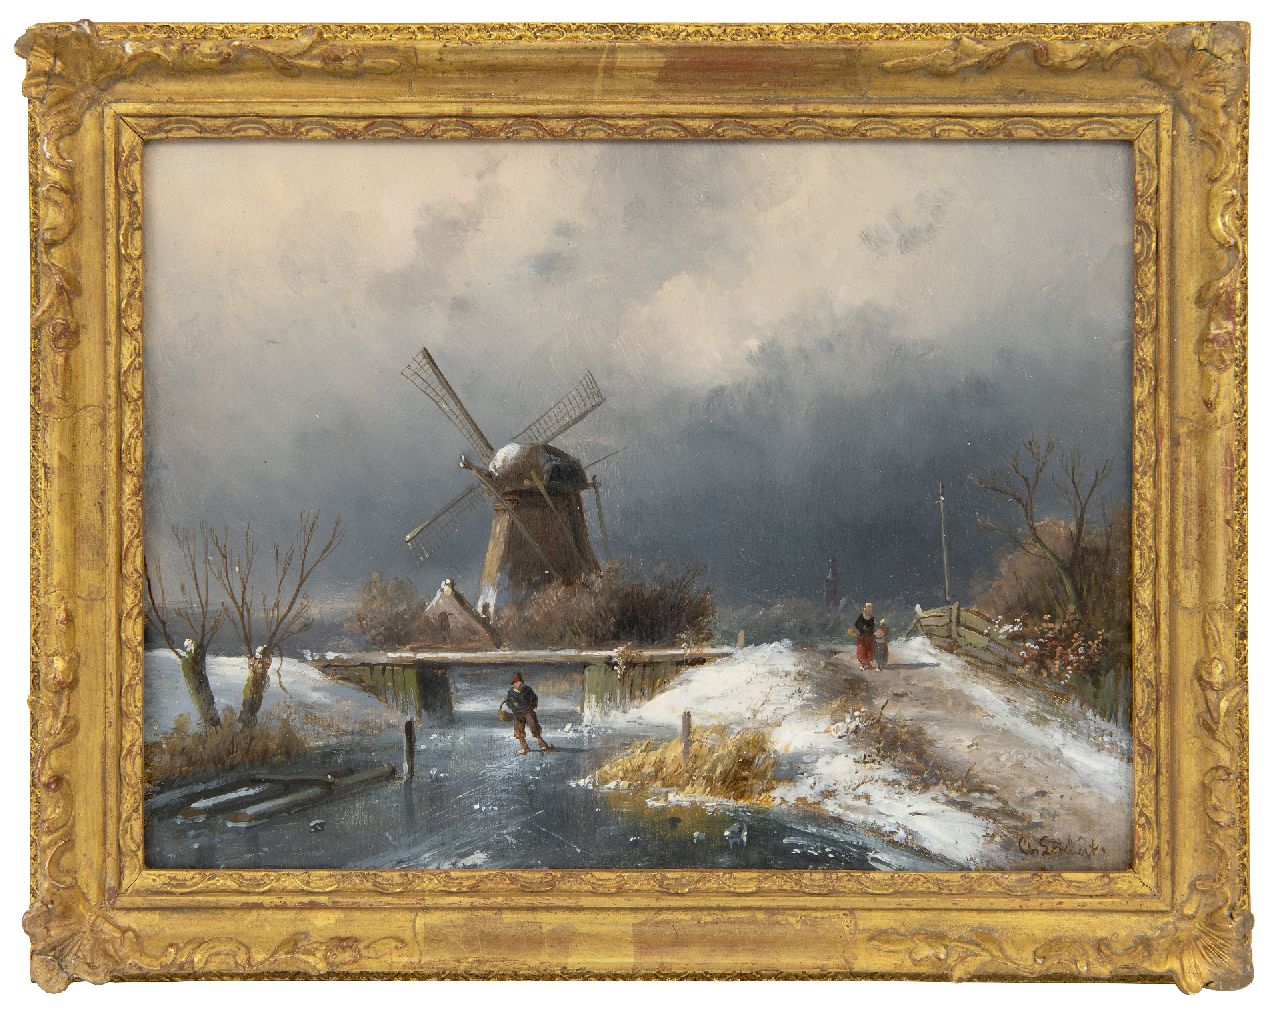 Leickert C.H.J.  | 'Charles' Henri Joseph Leickert | Paintings offered for sale | Skater on a frozen water at a windmill, oil on panel 19.2 x 26.0 cm, signed l.r.